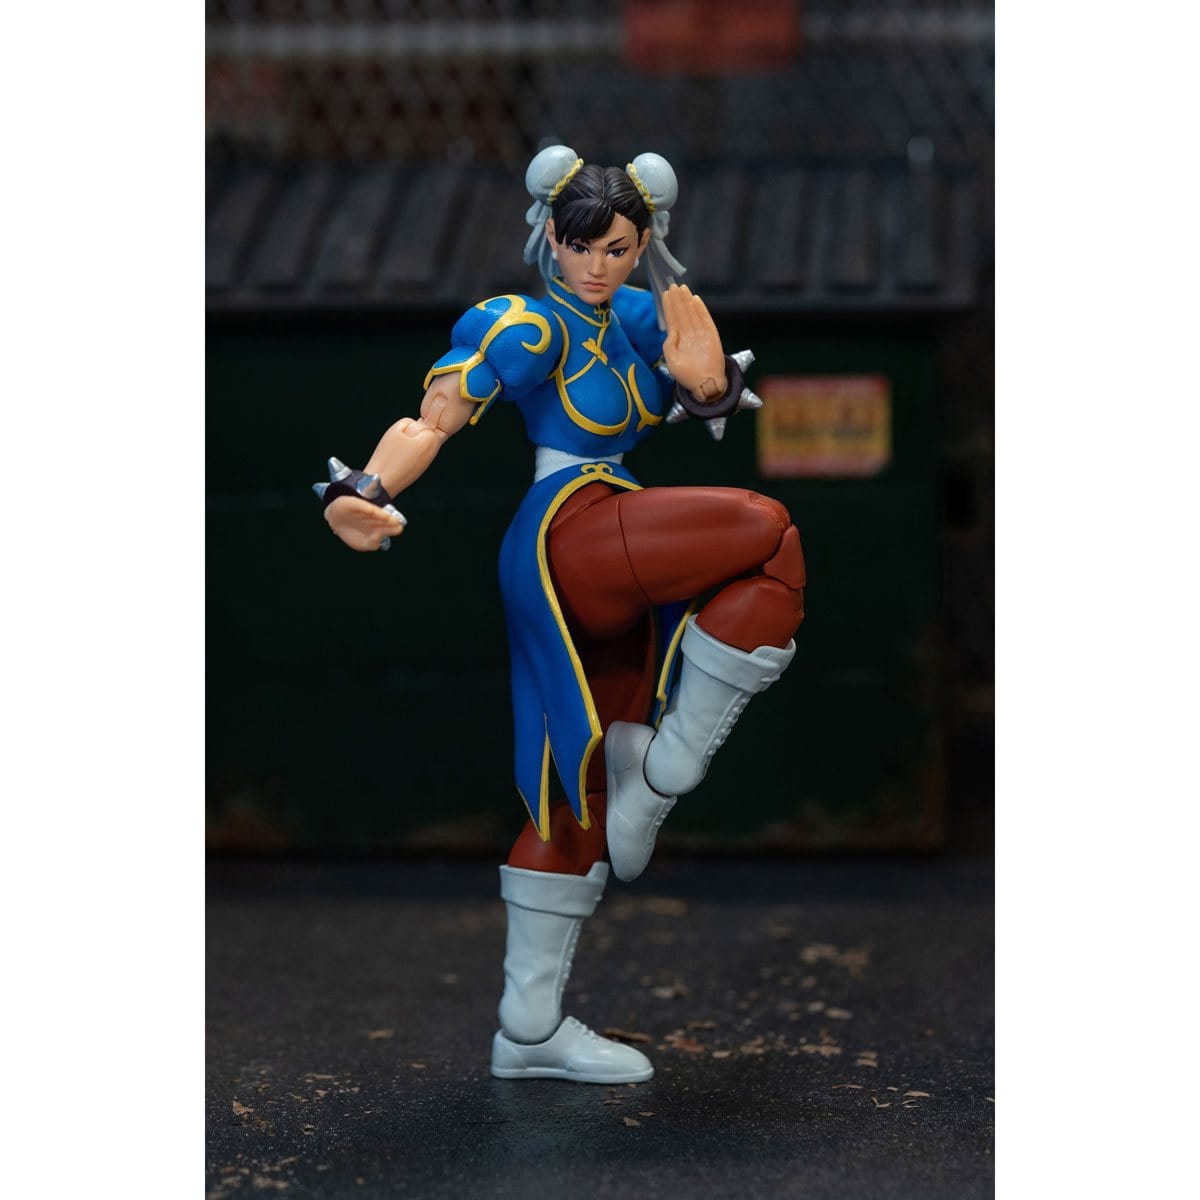 Ultra-Street-Fighter-II-Chun-Li6-Inch-Scale-Action-Figure-toys-pose-collectible-winning-pose